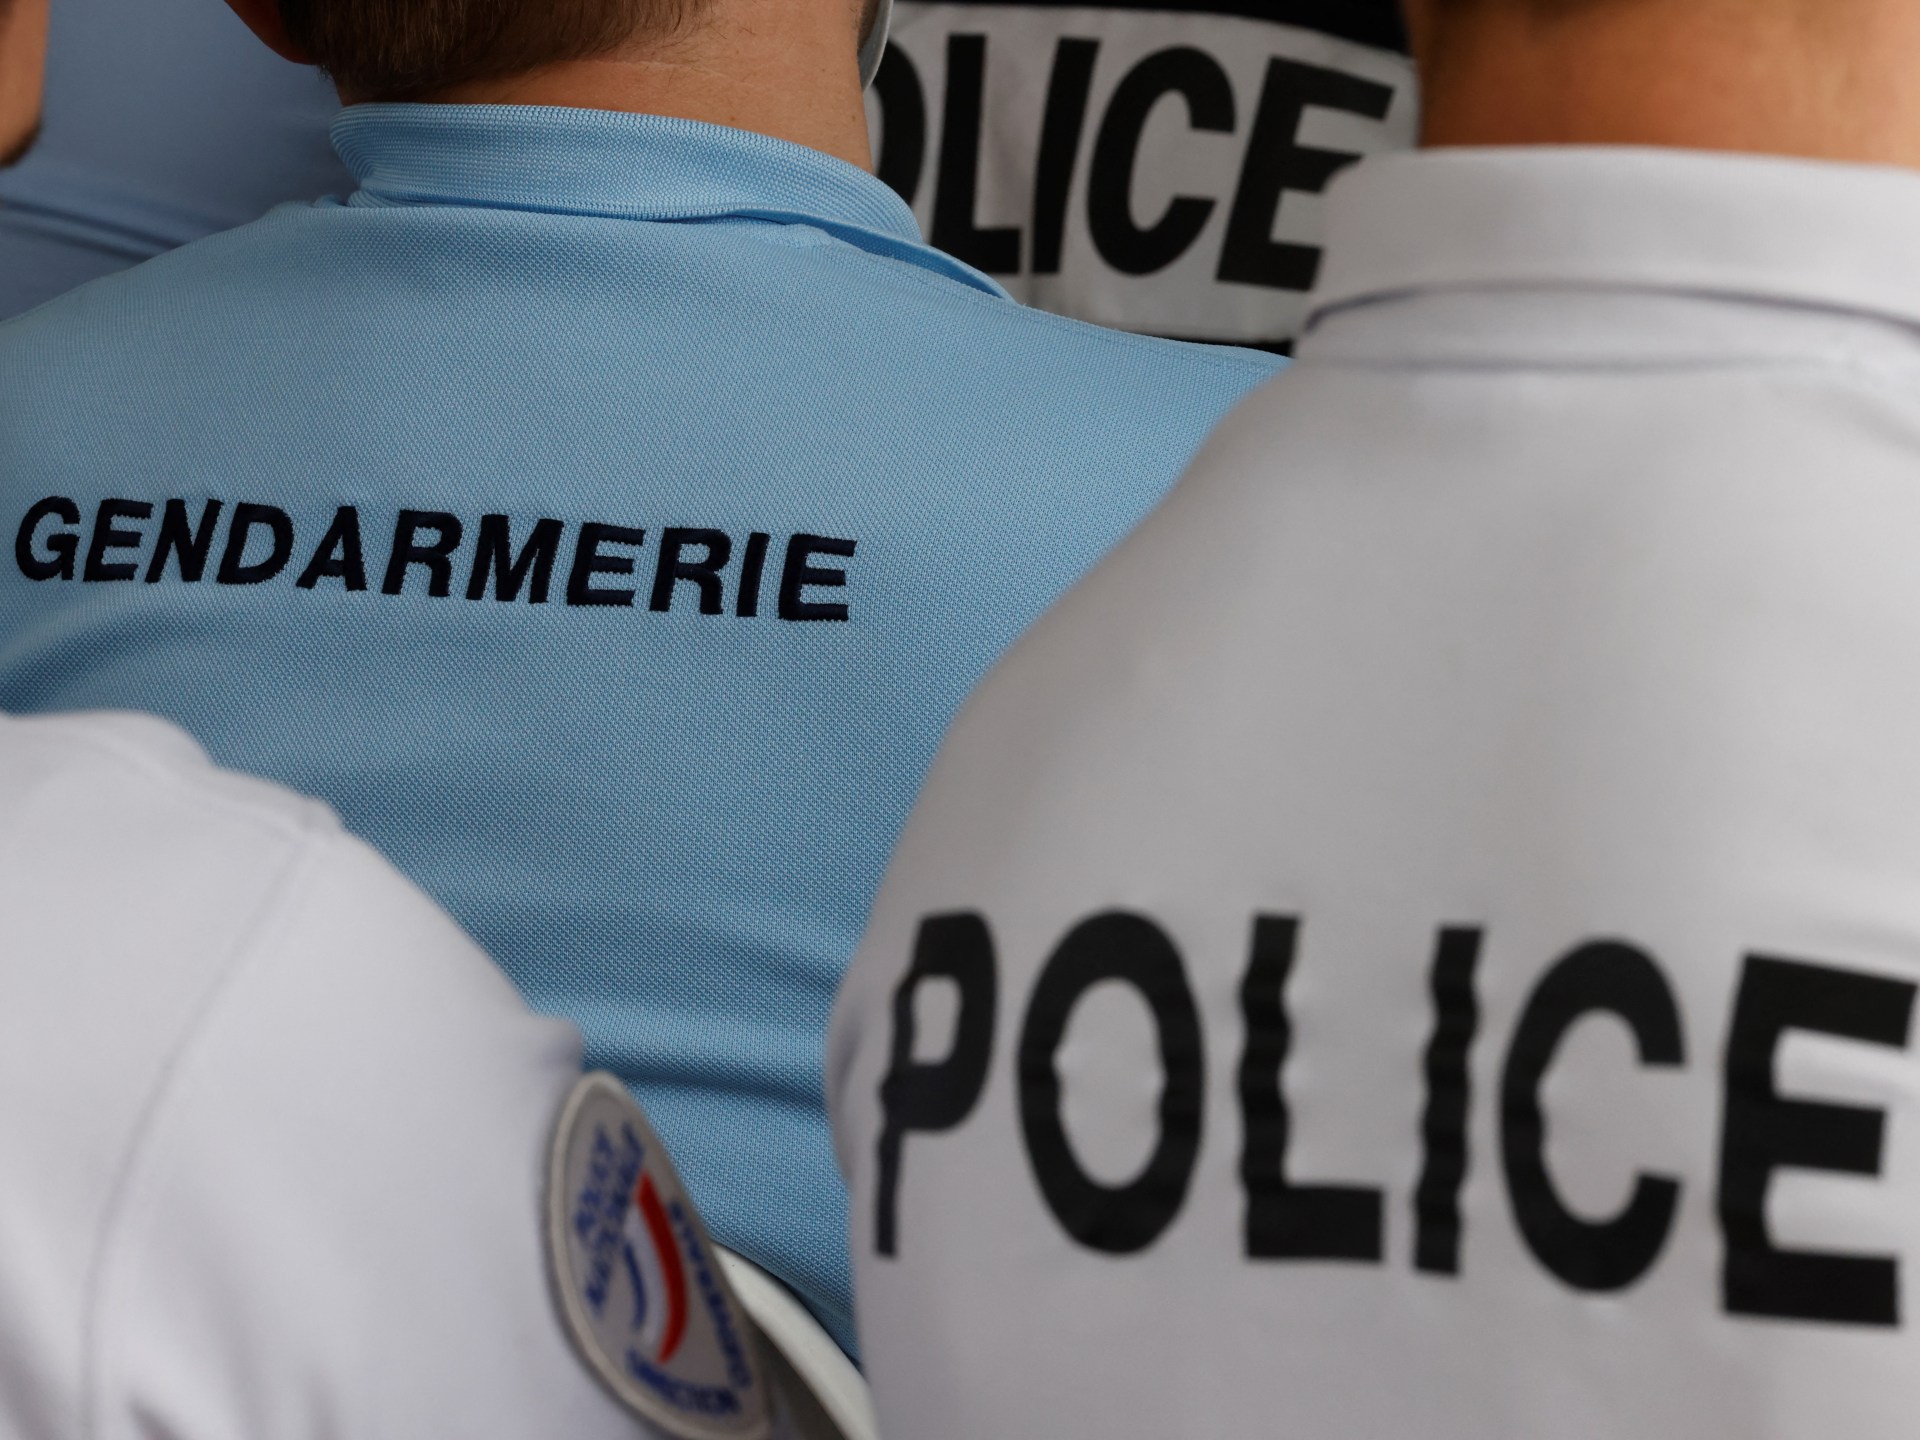 French teen seeks justice after policeman beats, urinates on him